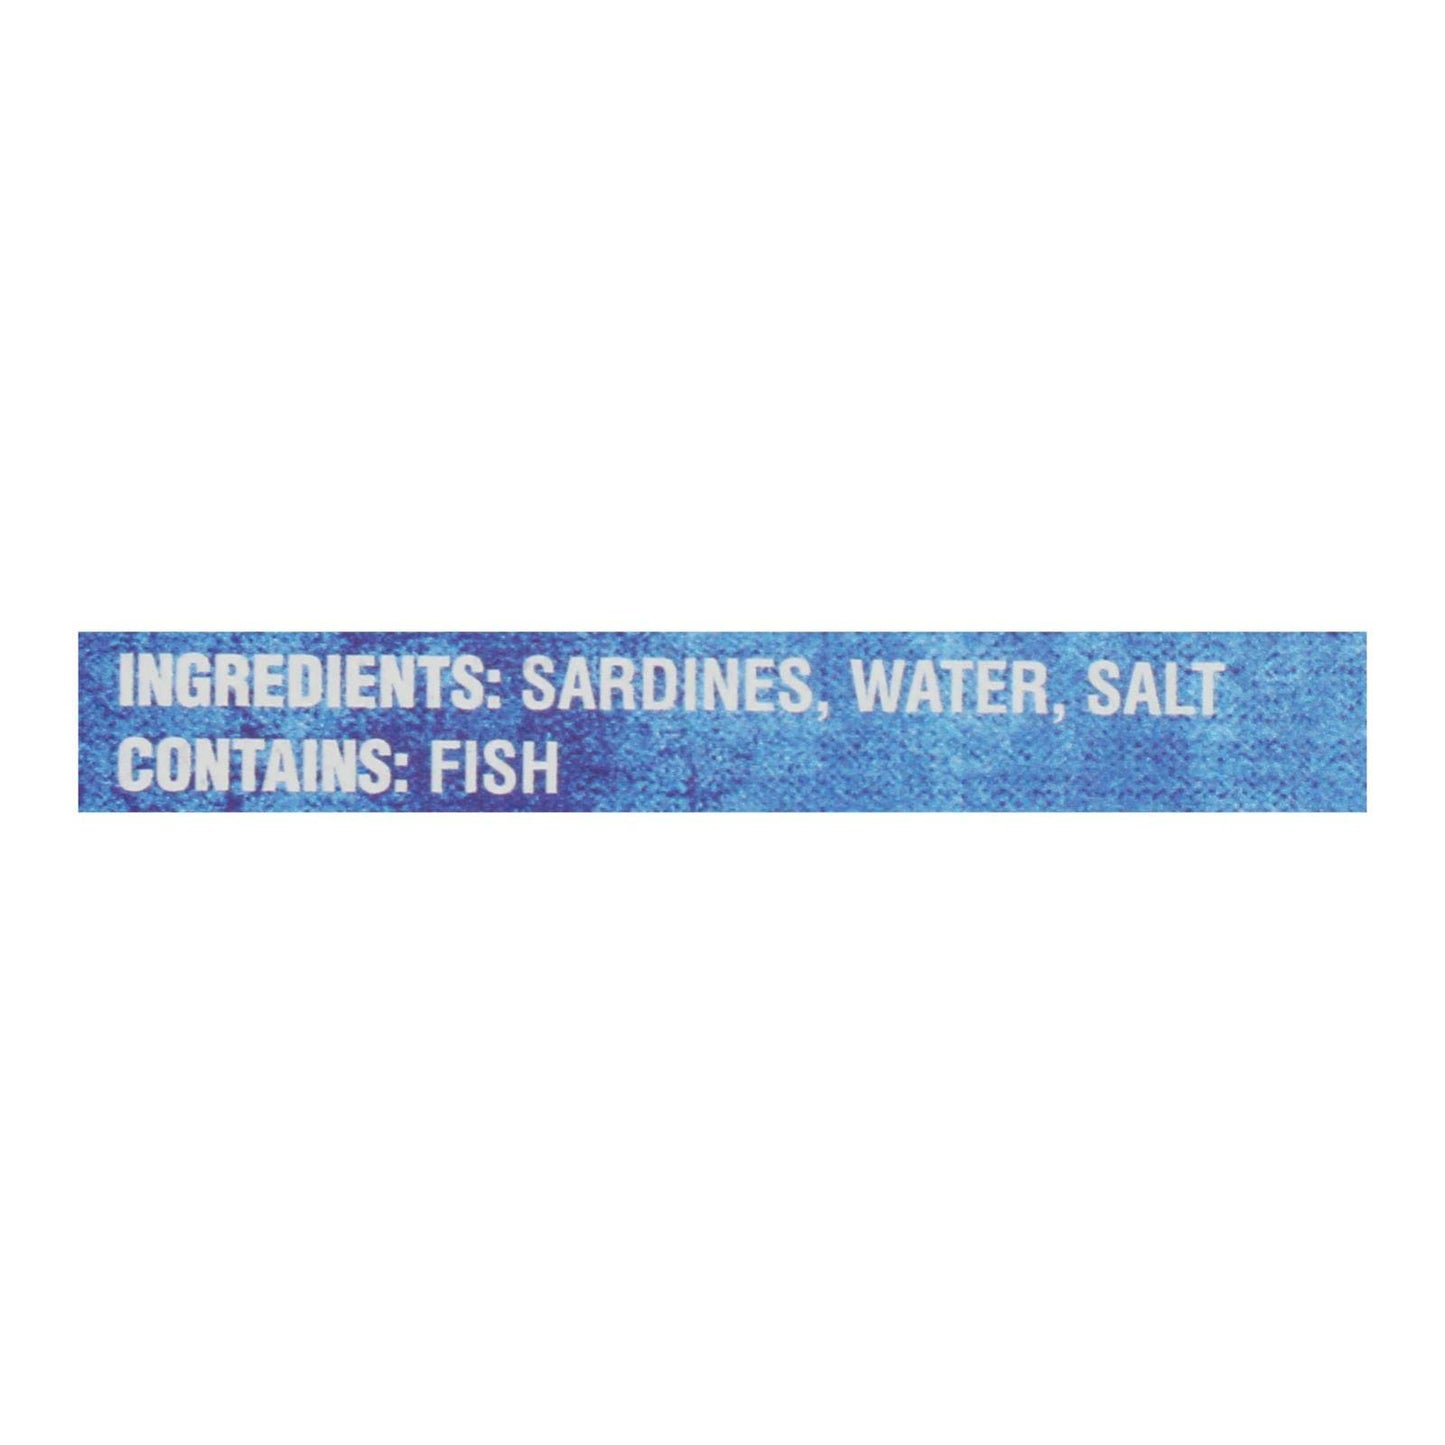 Crown Prince Skinless And Boneless Sardines In Water - Case Of 12 - 4.37 Oz. | OnlyNaturals.us